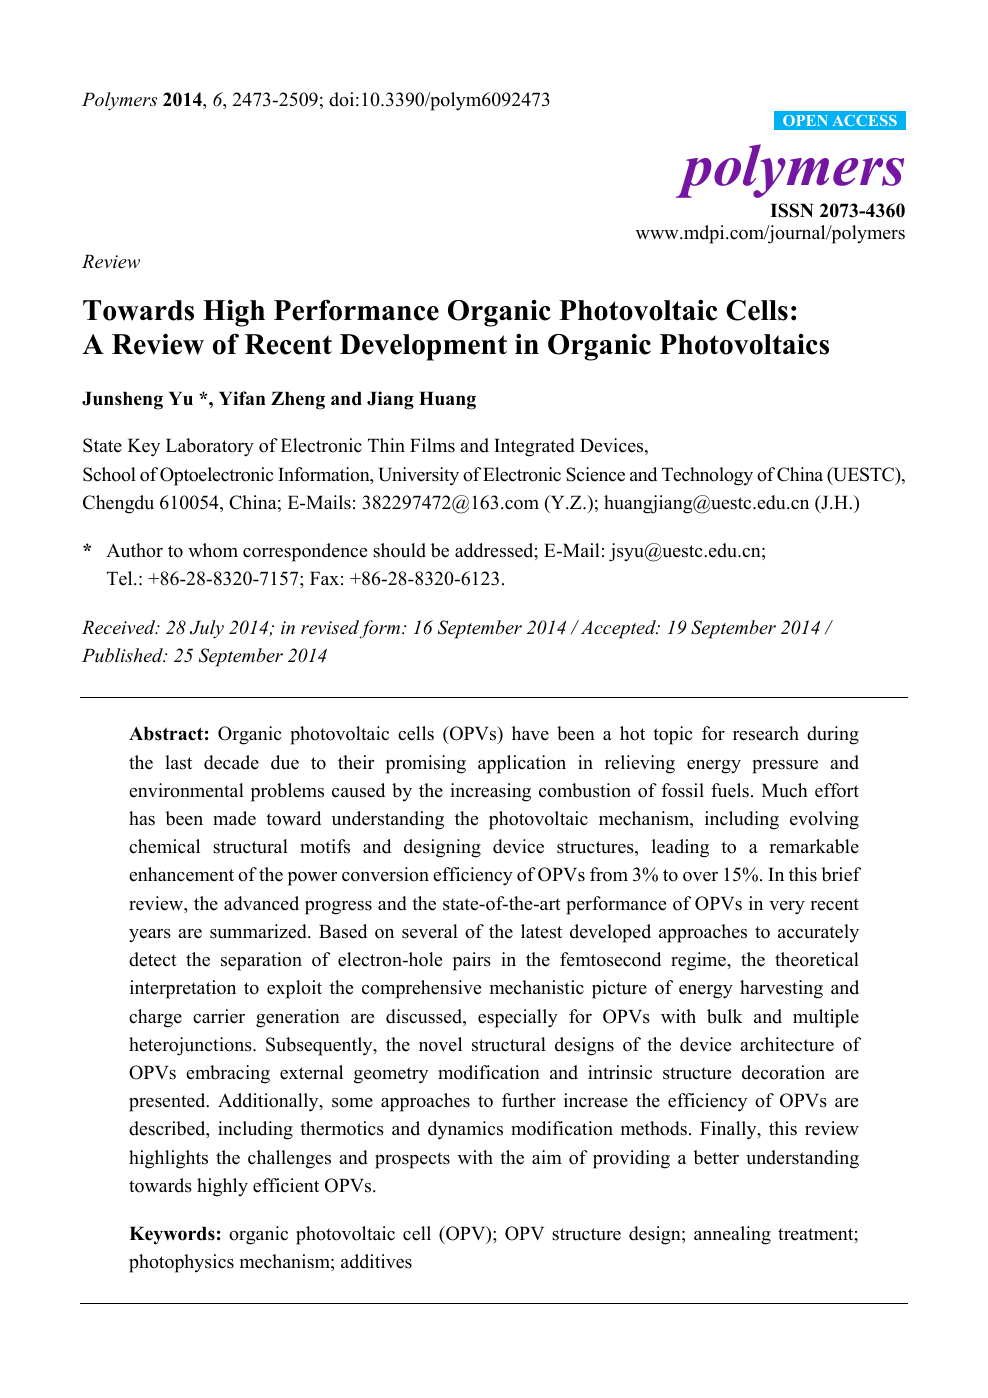 Towards High Performance Organic Photovoltaic Cells: A Review of 